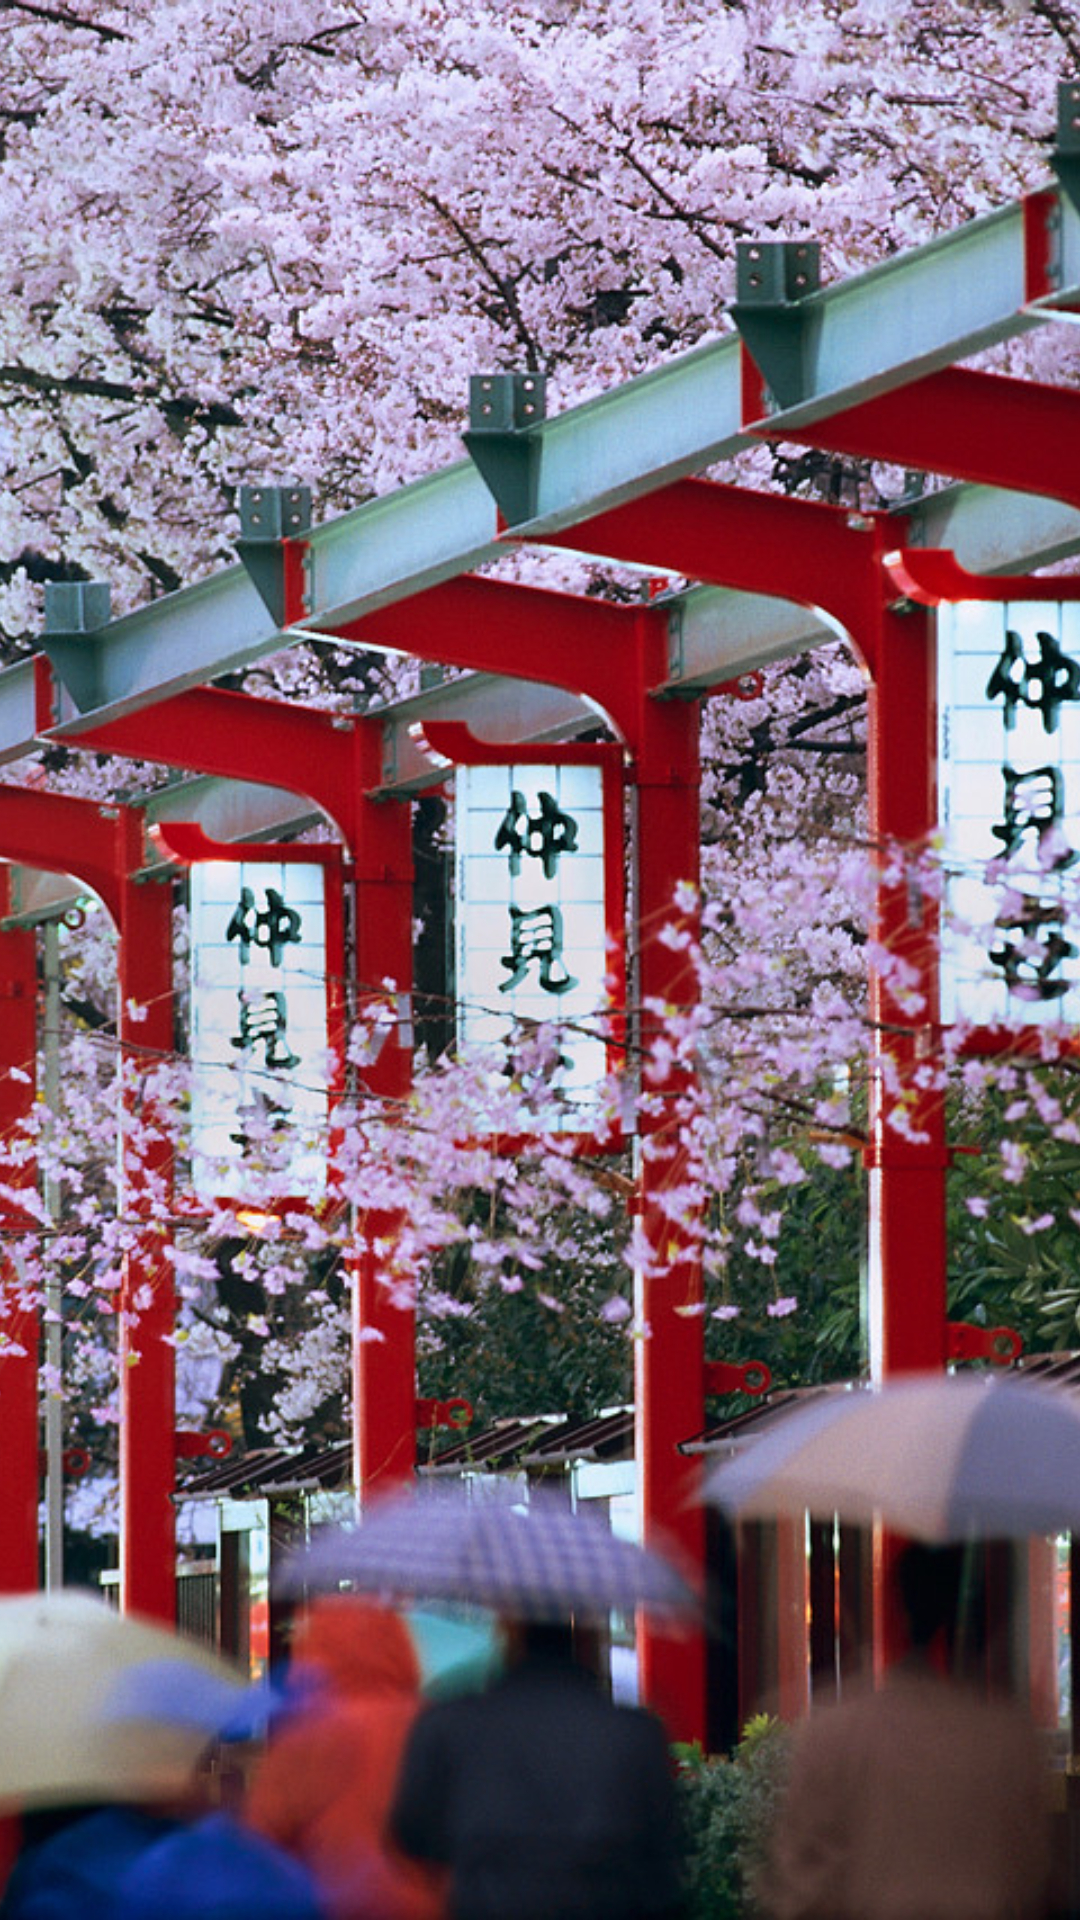 7 positive lessons to adopt from Japanese lifestyle
